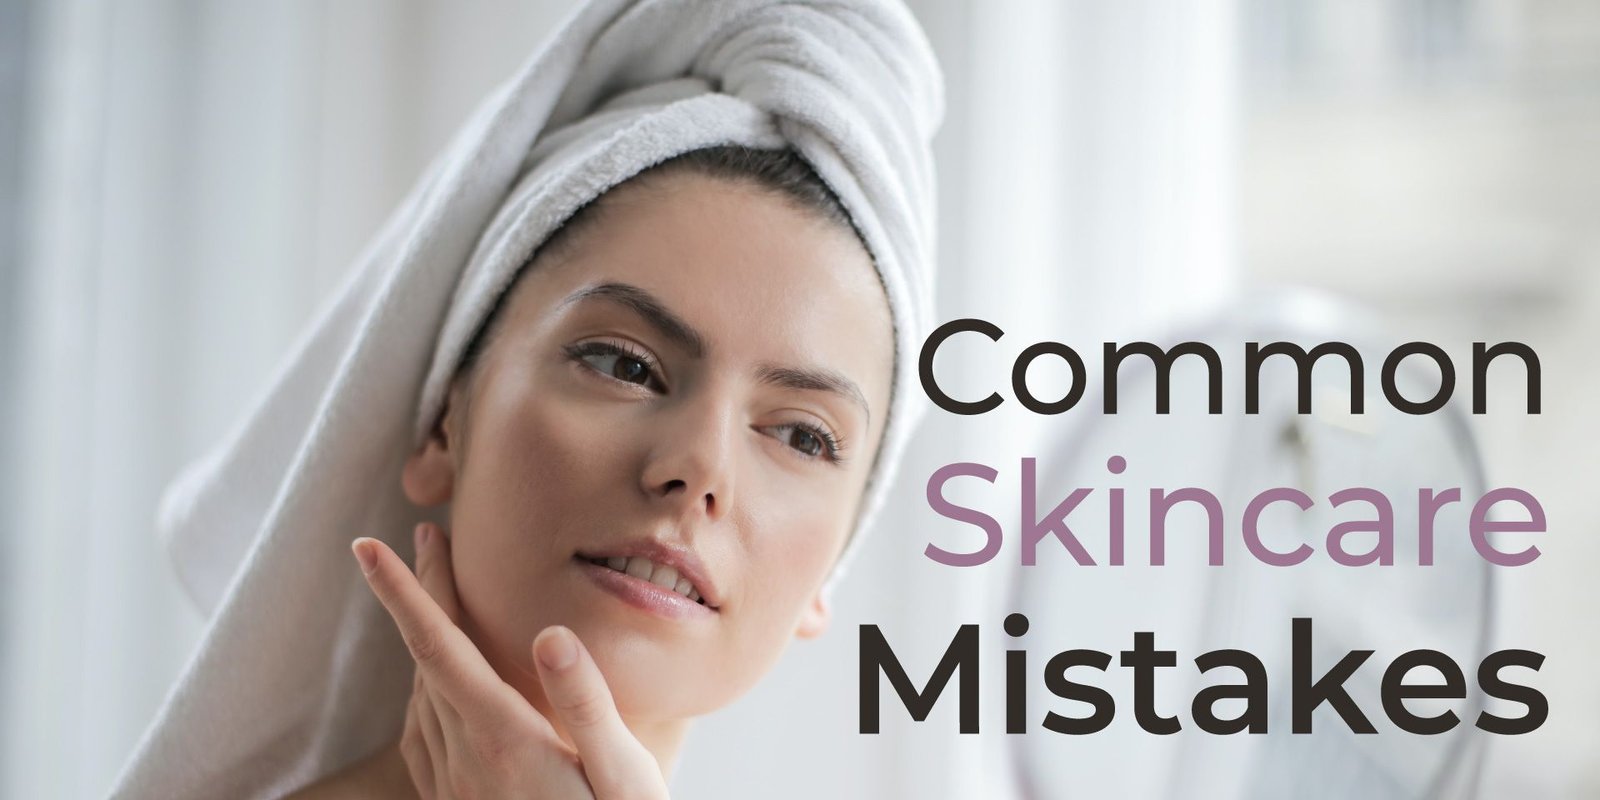 Top 5 Common Skincare Mistakes to Avoid for Healthy, Radiant Skin